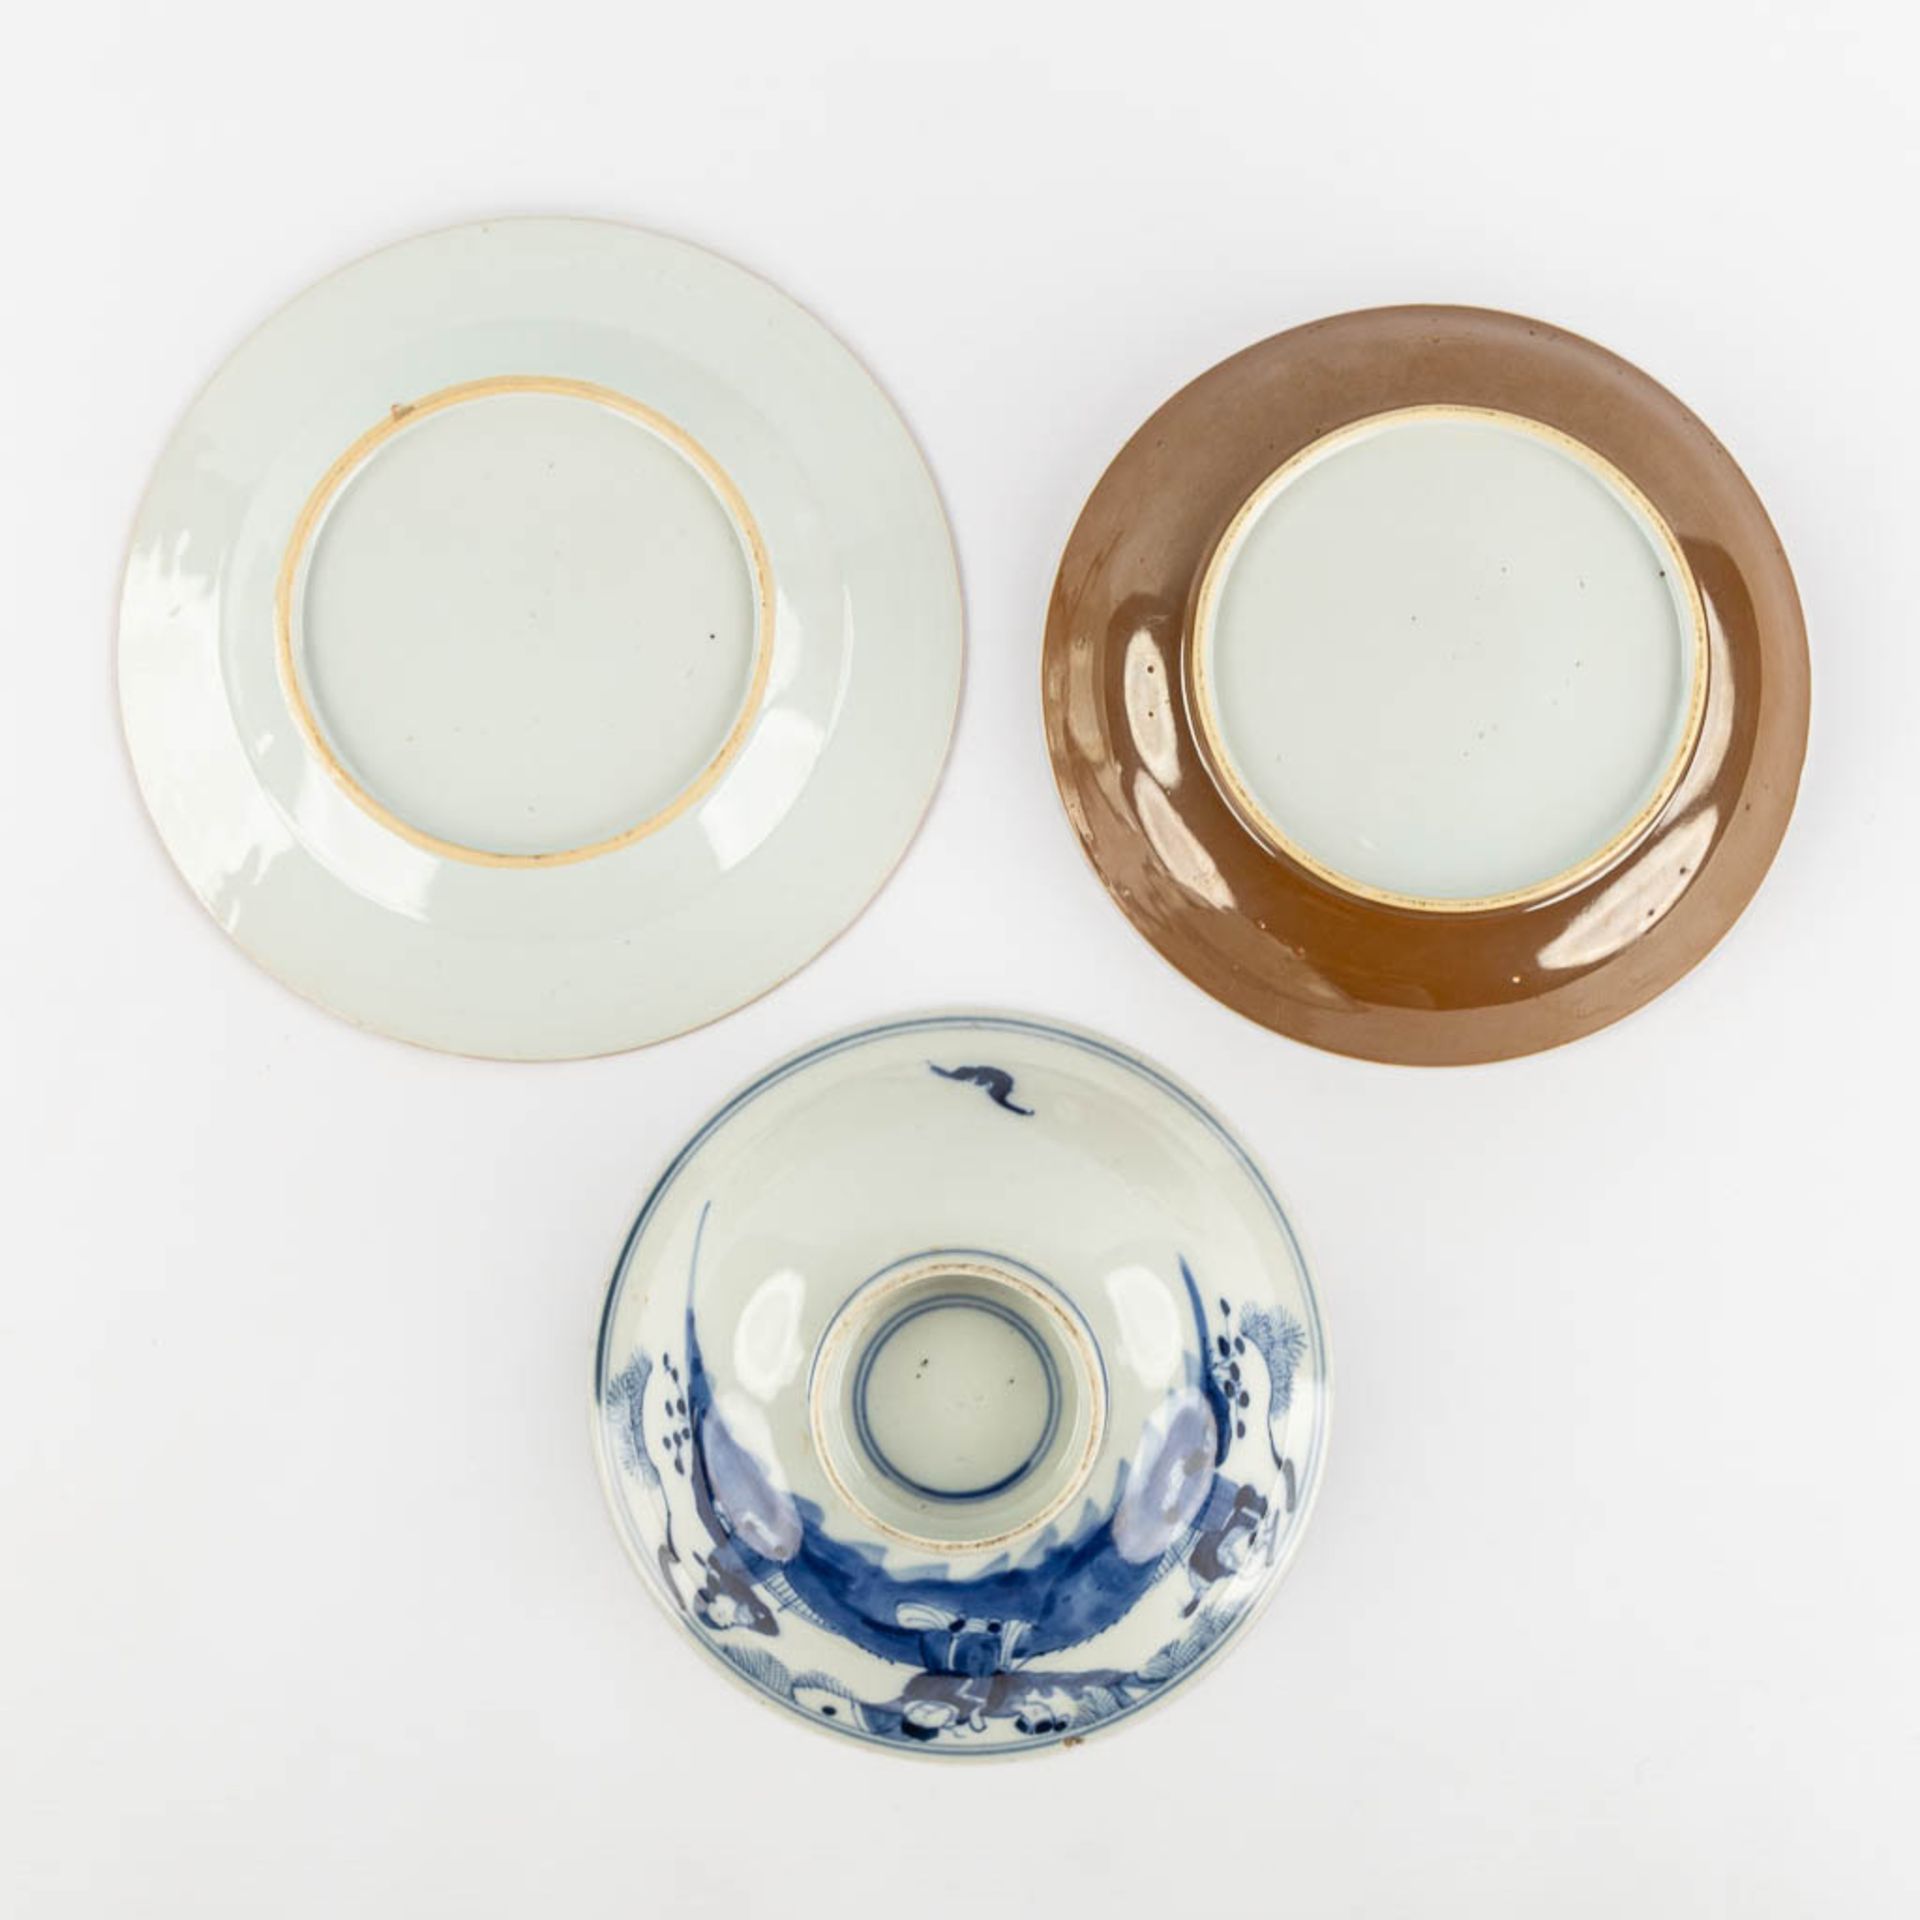 Fifteen Chinese cups, saucers and plates, blue white and Famille Roze. (D:23,4 cm) - Bild 6 aus 15